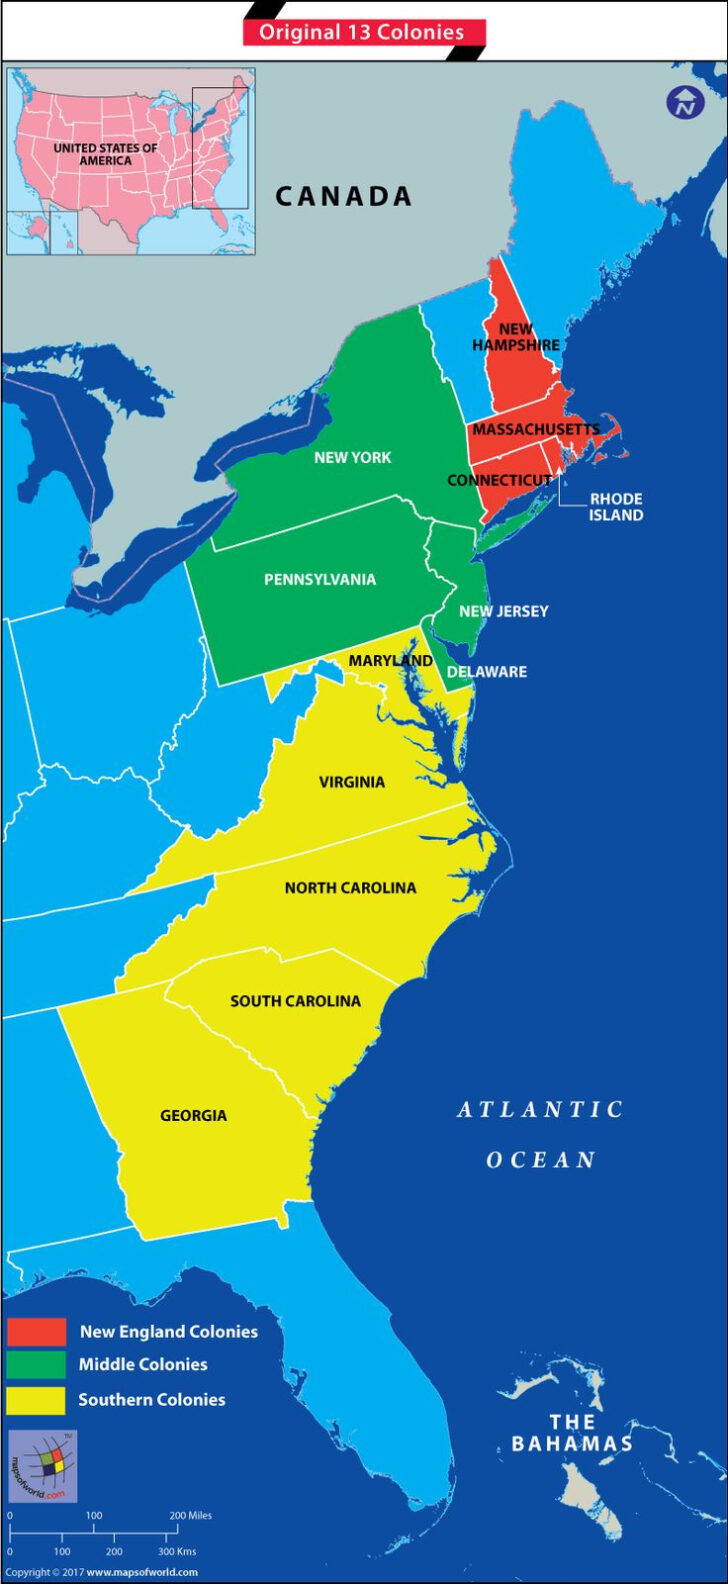 Map Of The 13 Colonies